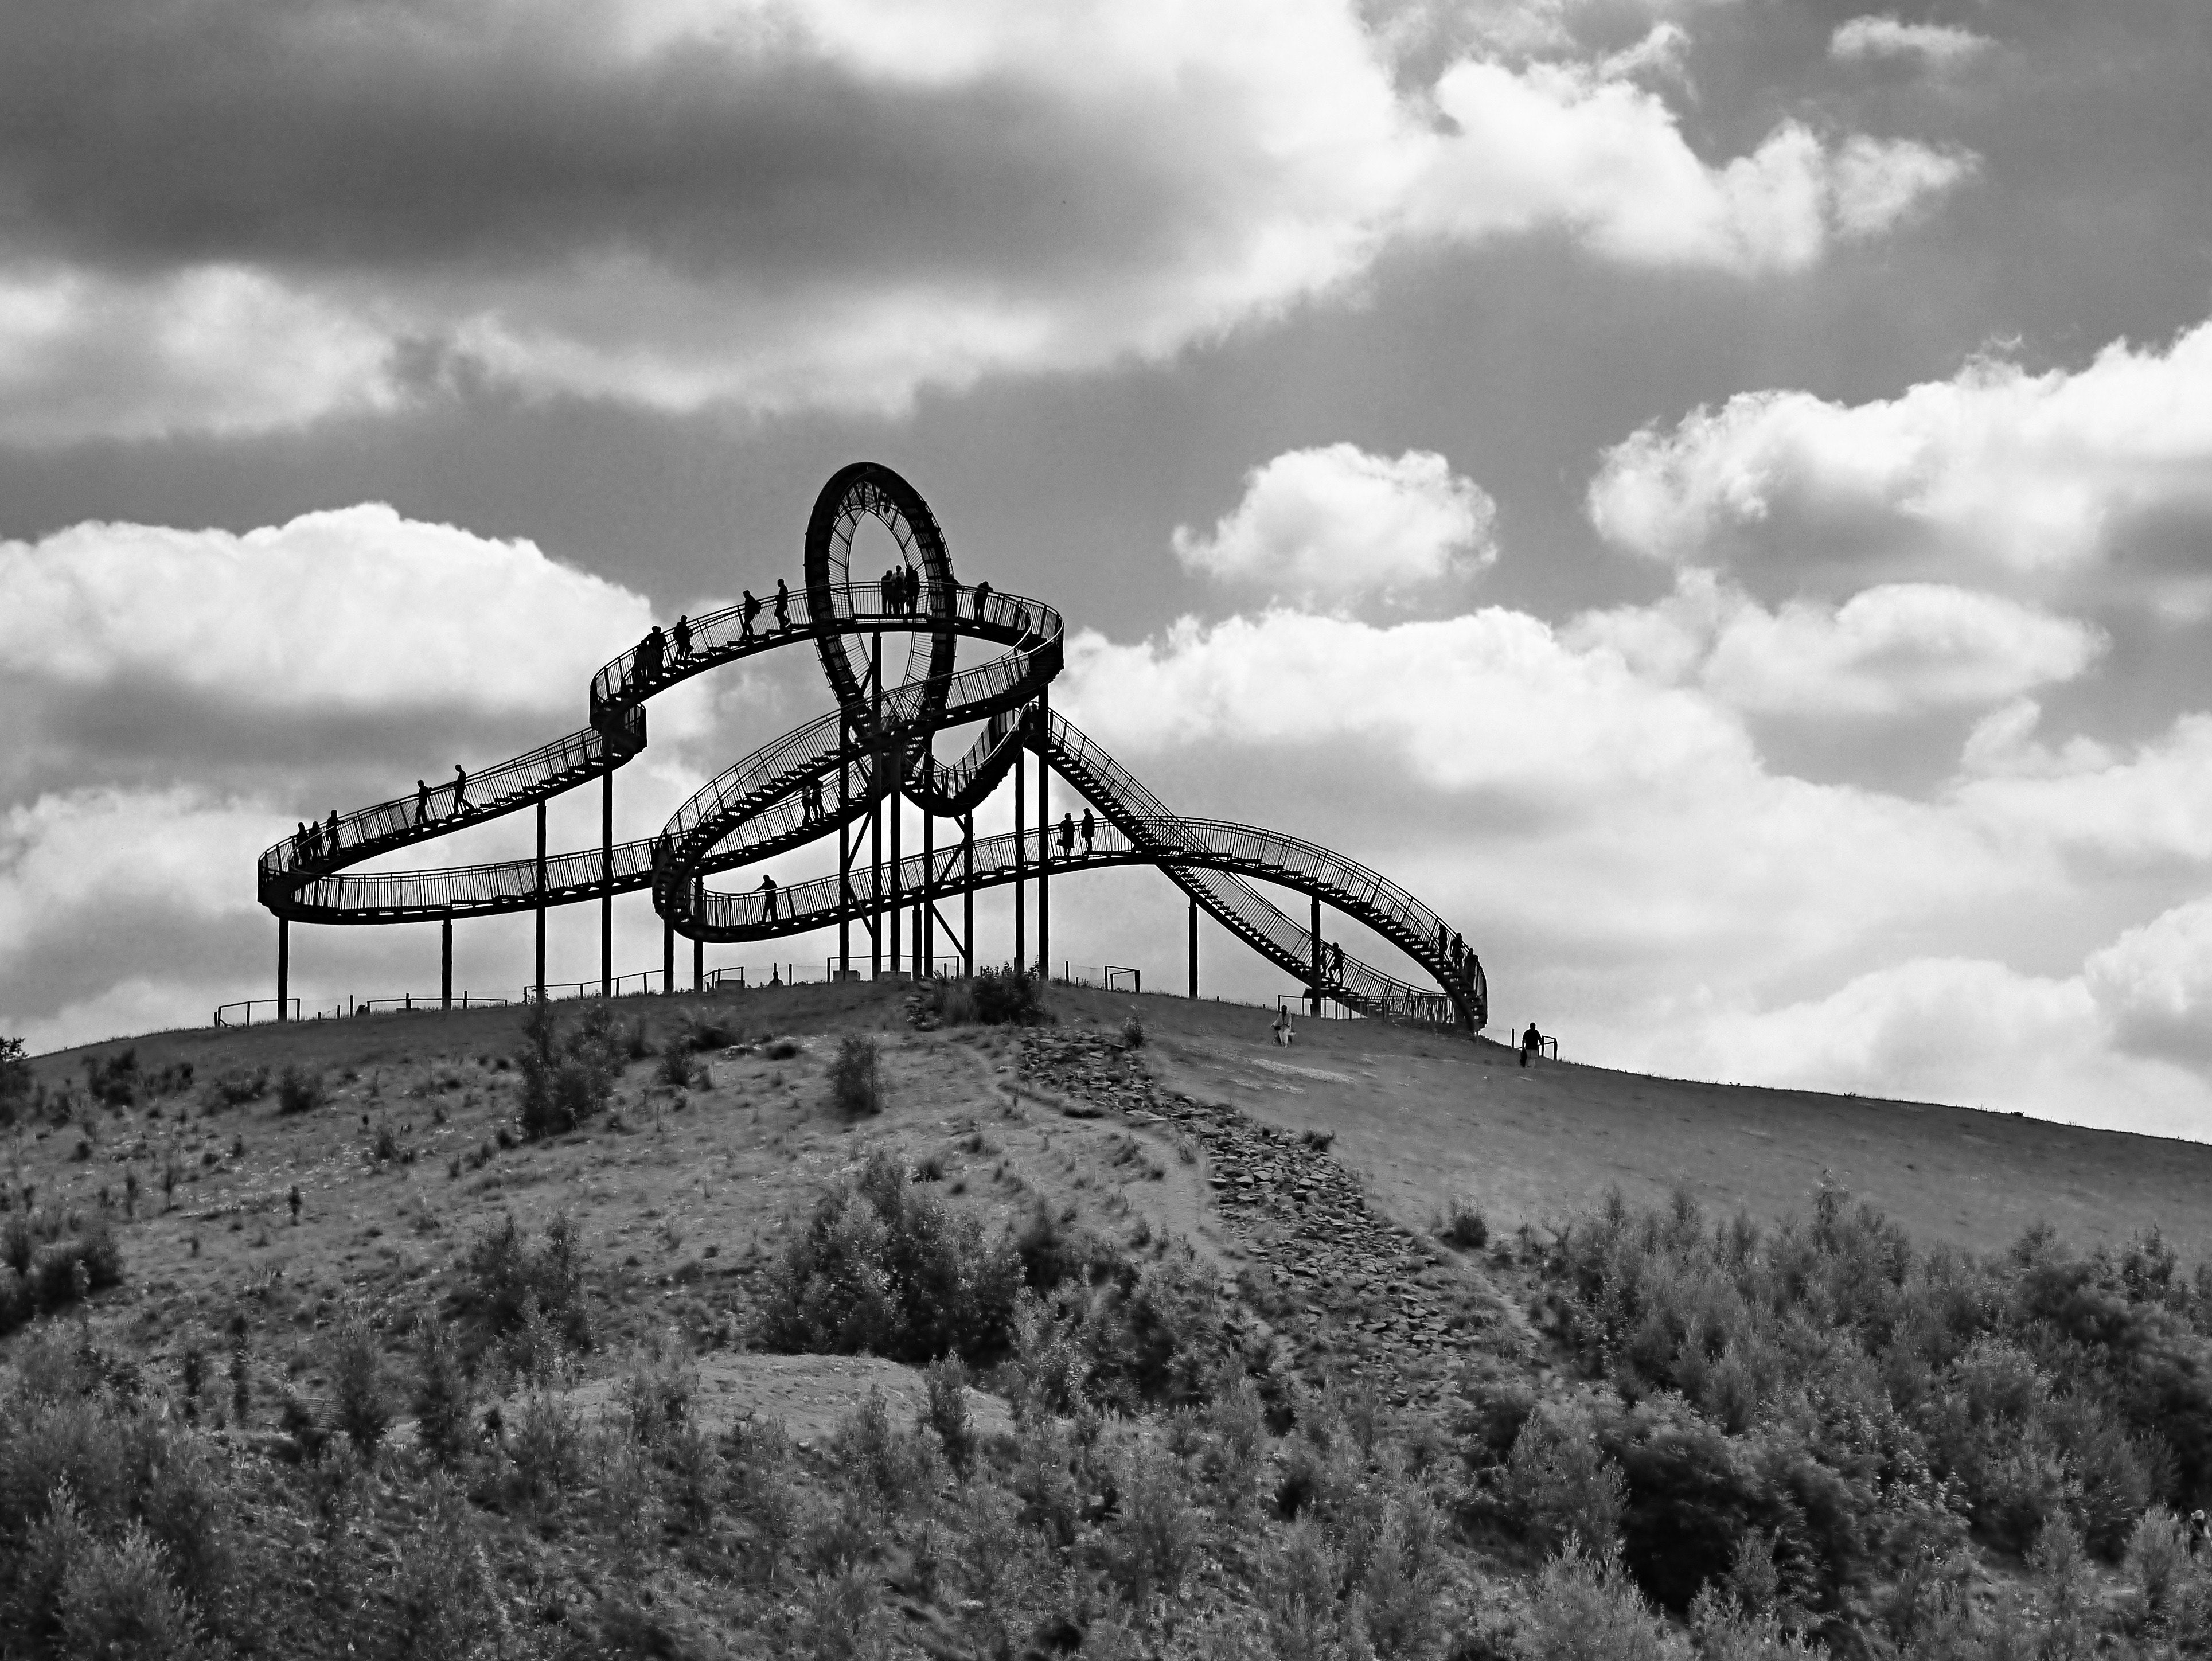 Black roller coaster in grey scale photography